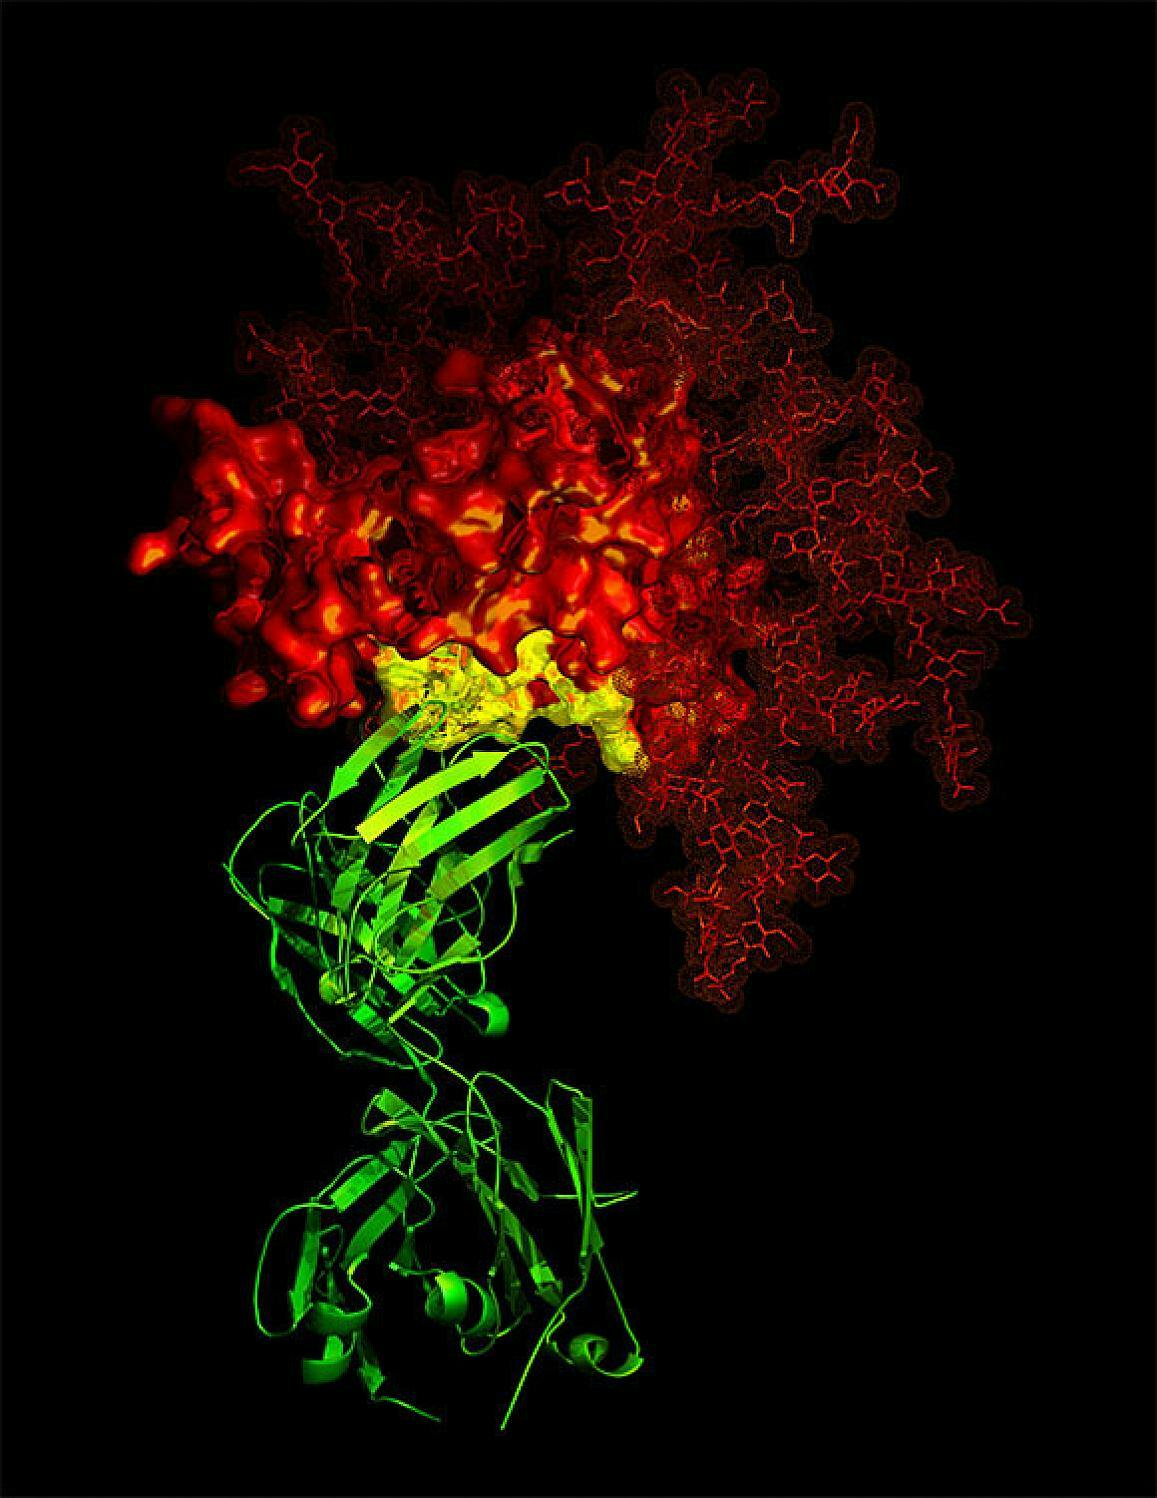 An example of antibody (green) targeting a critical area (yellow) of a viral protein (red, in this case HIV).